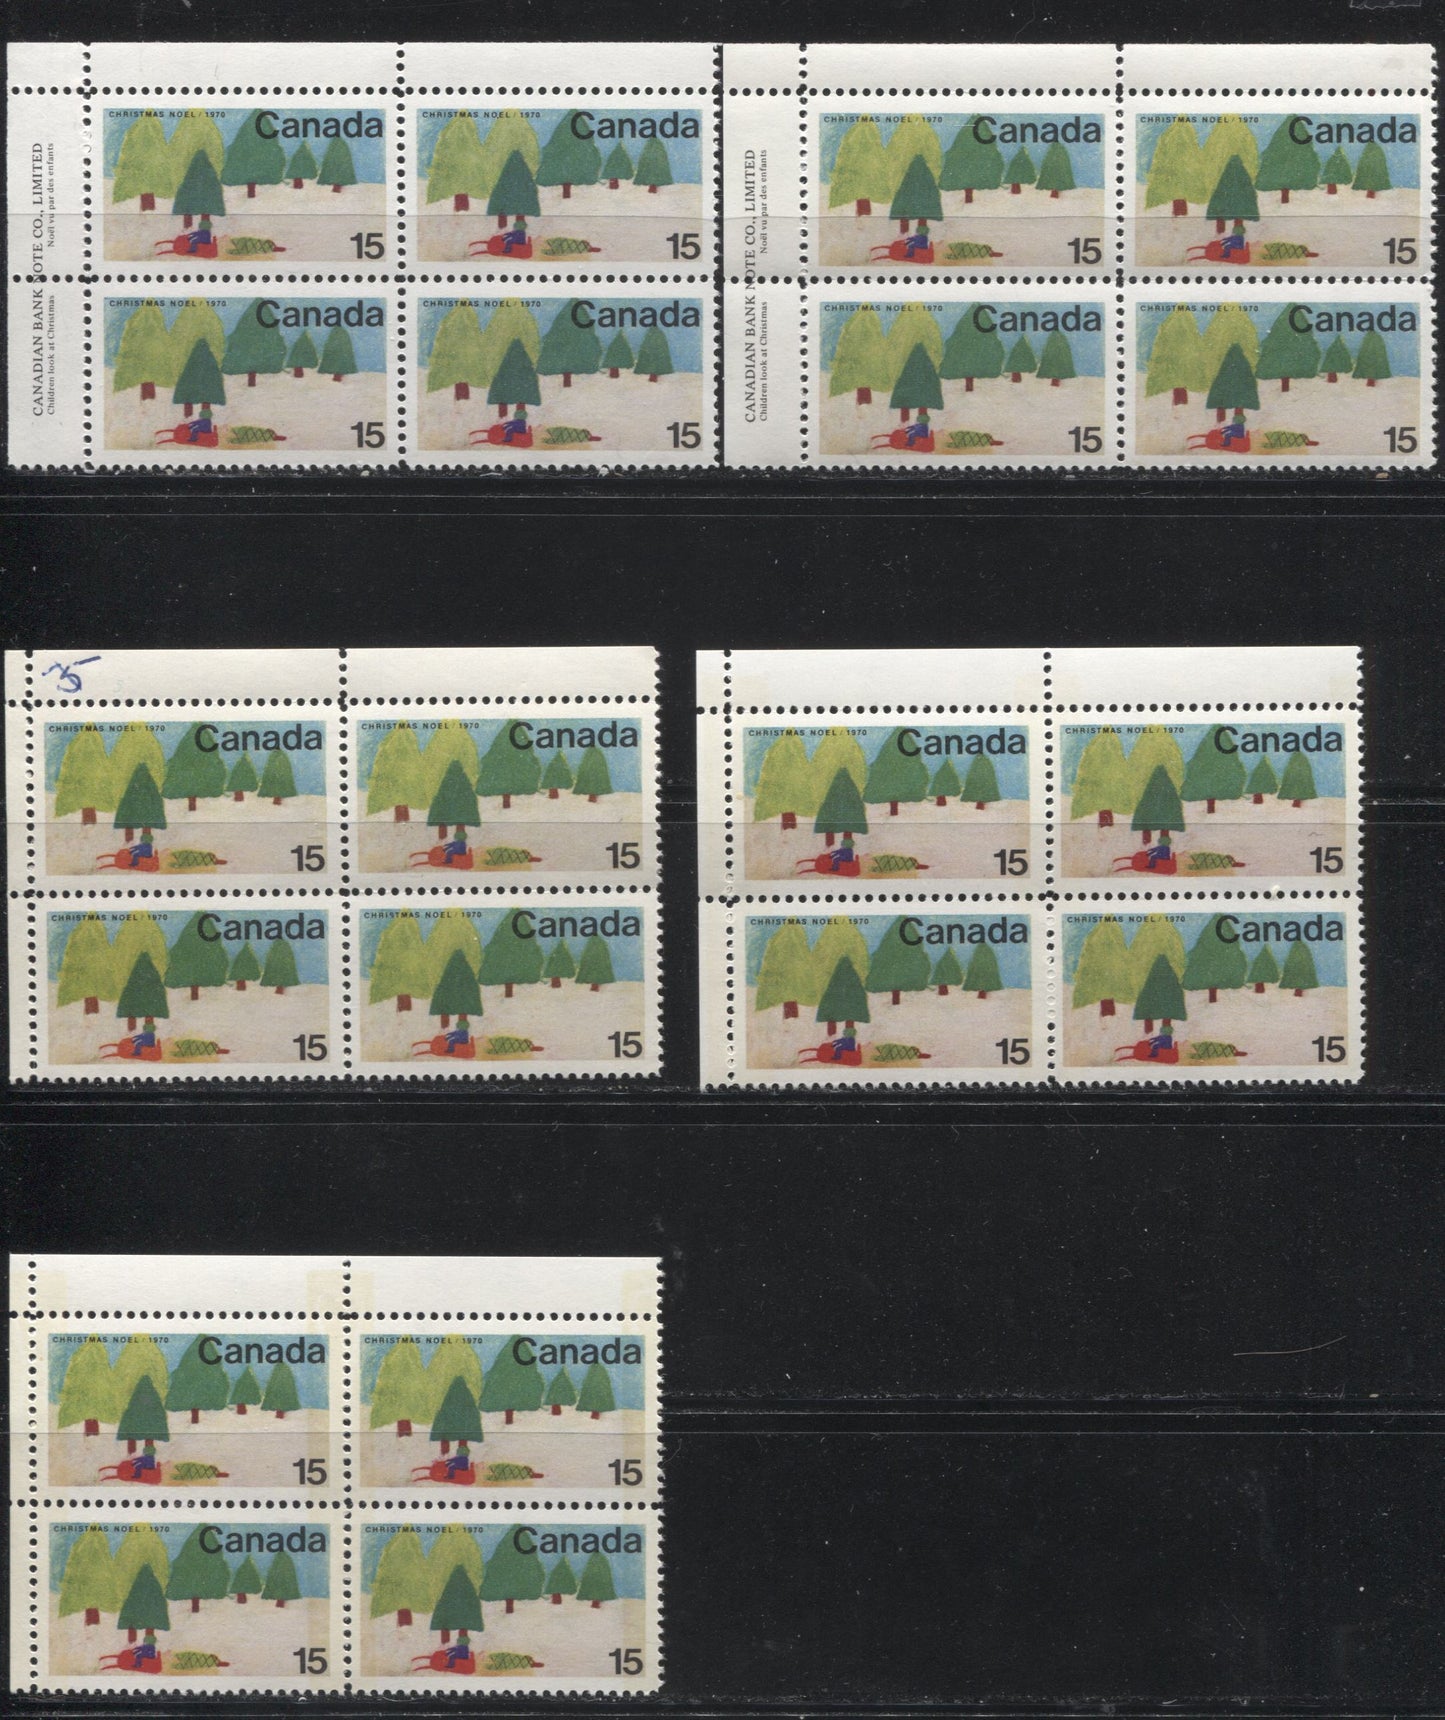 Lot 173 Canada #530-530p 15c Multicoloured Snowmobile, 1970 Christmas Issue, Five VFNH Untagged and Winnipeg Tagged Upper Left Inscription and Field Stock Blocks of 4 on Ribbed HB 11 and HB12 Papers, Various Perfs